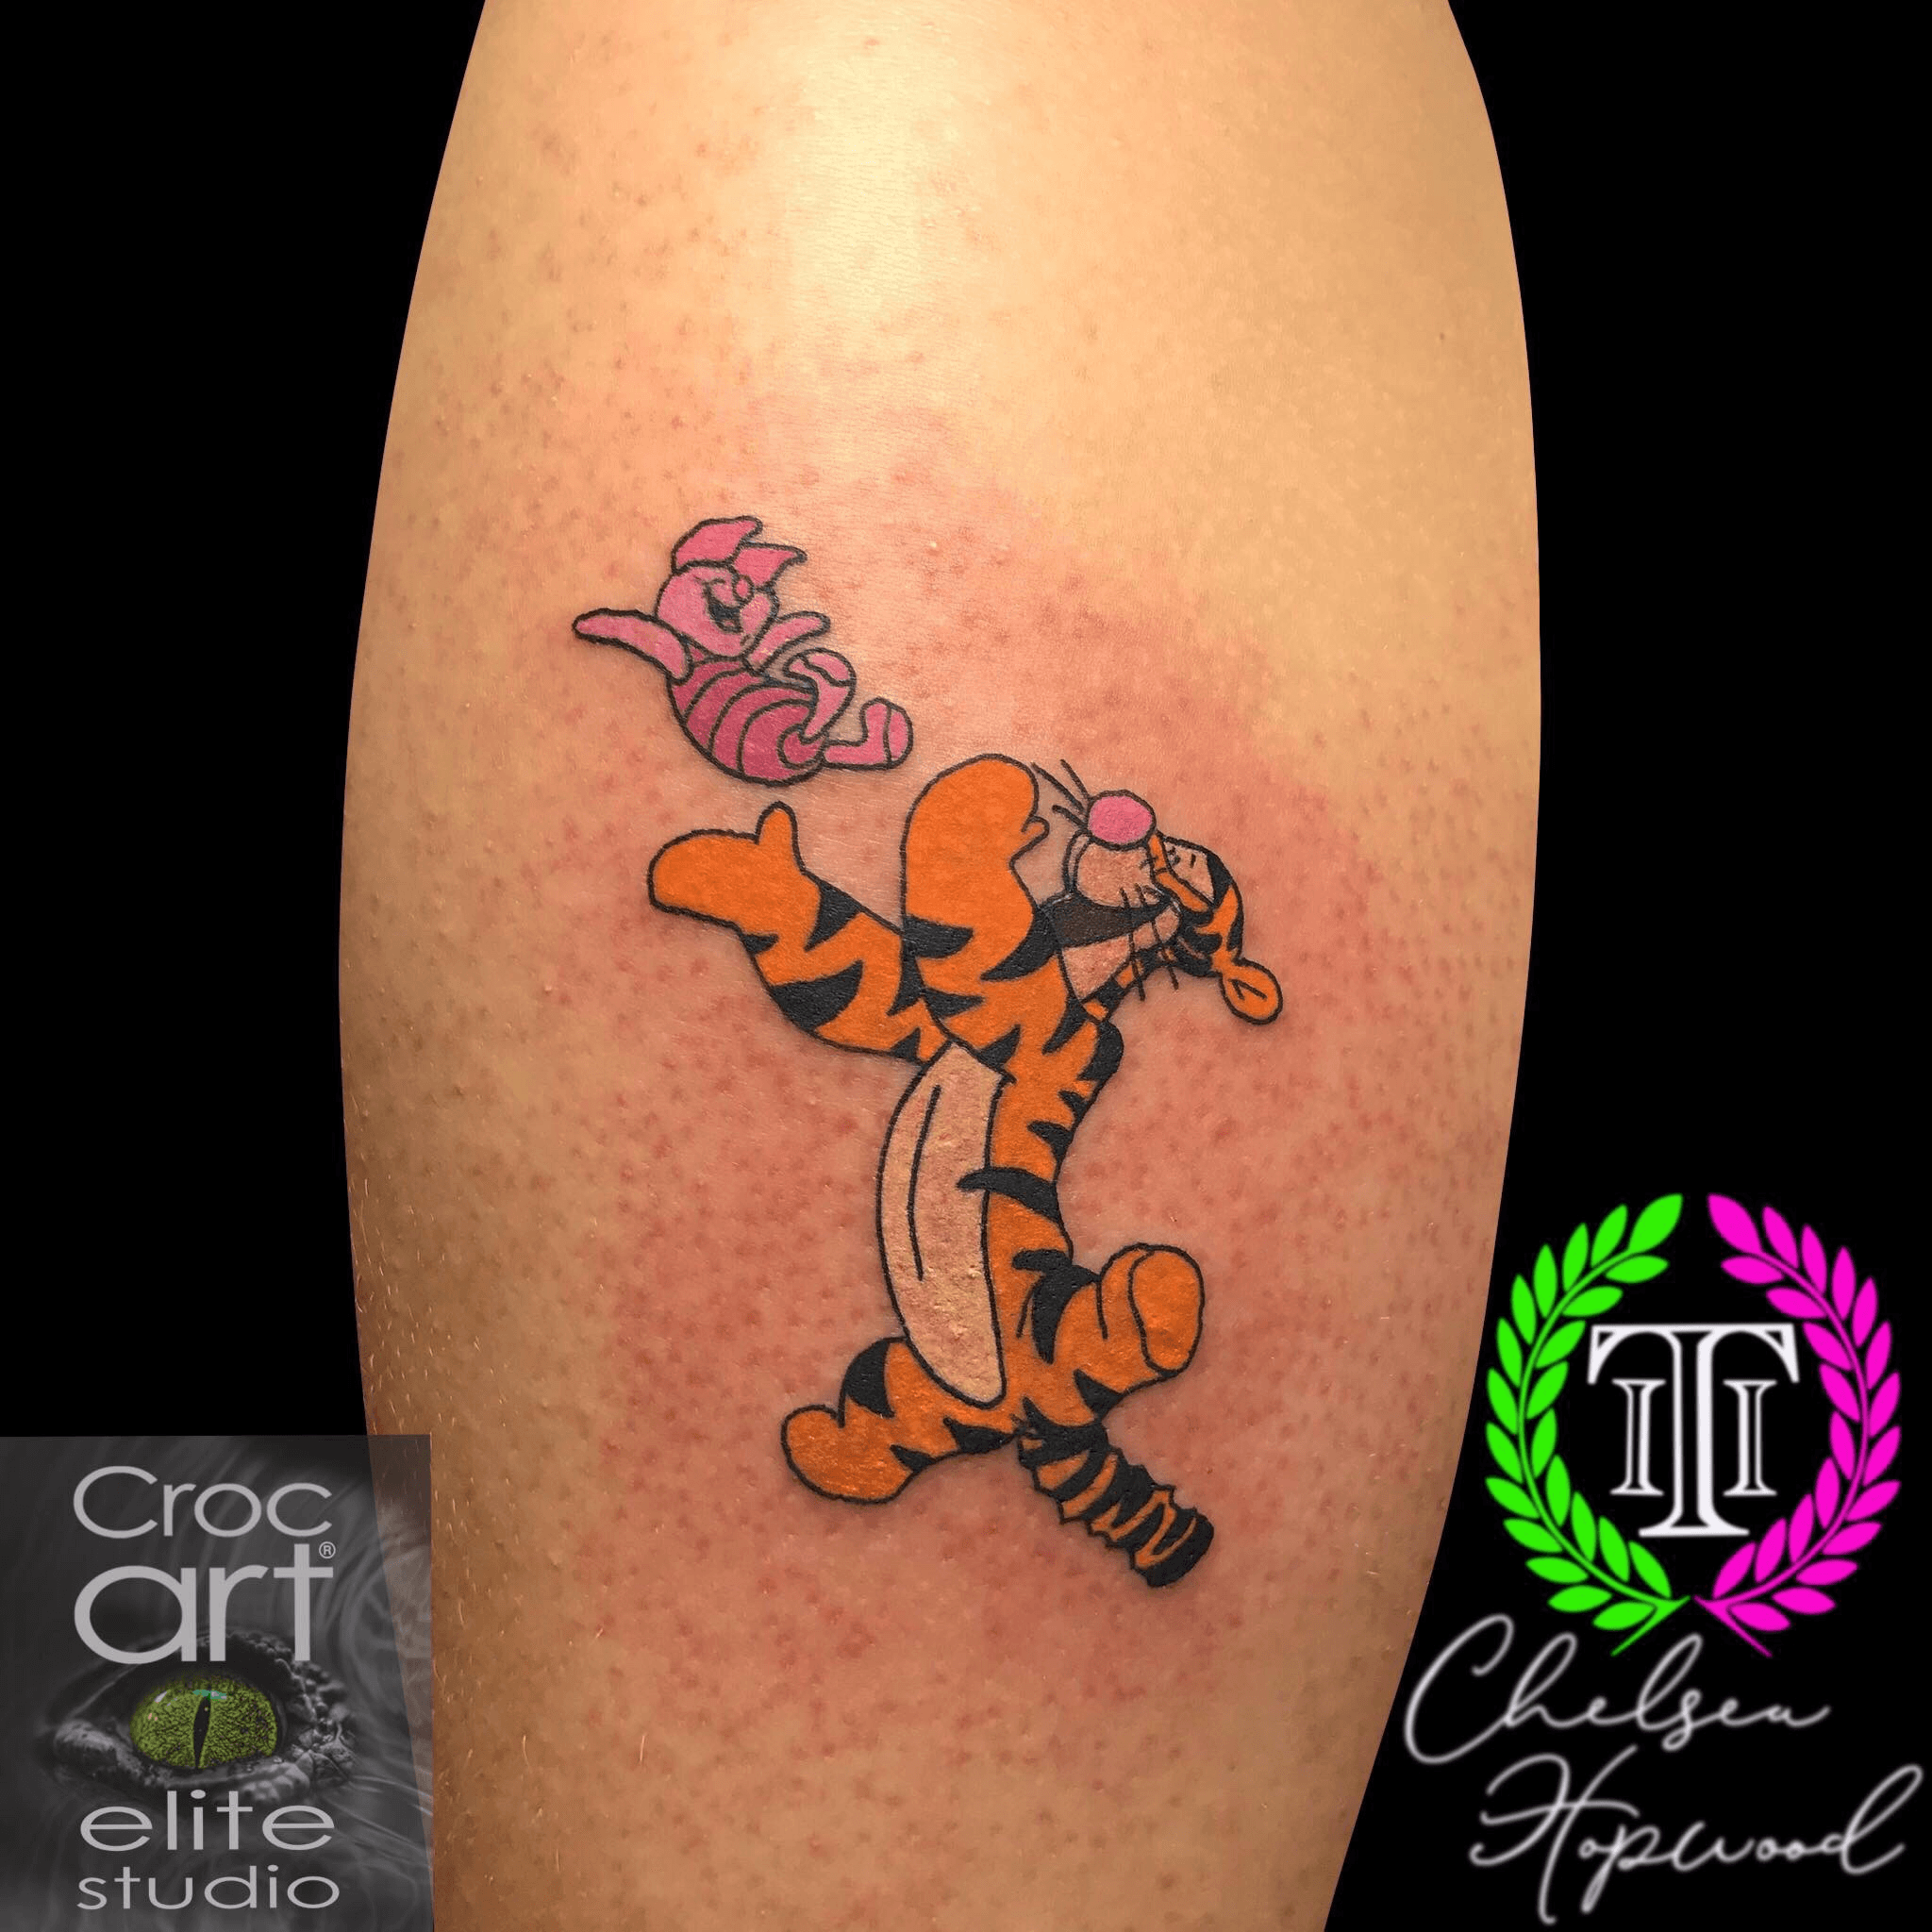 Tattoo Picture Tigger Tattoo Pictures to Pin on Pinterest  Eeyore tattoo  Disney tattoos Tattoos for daughters